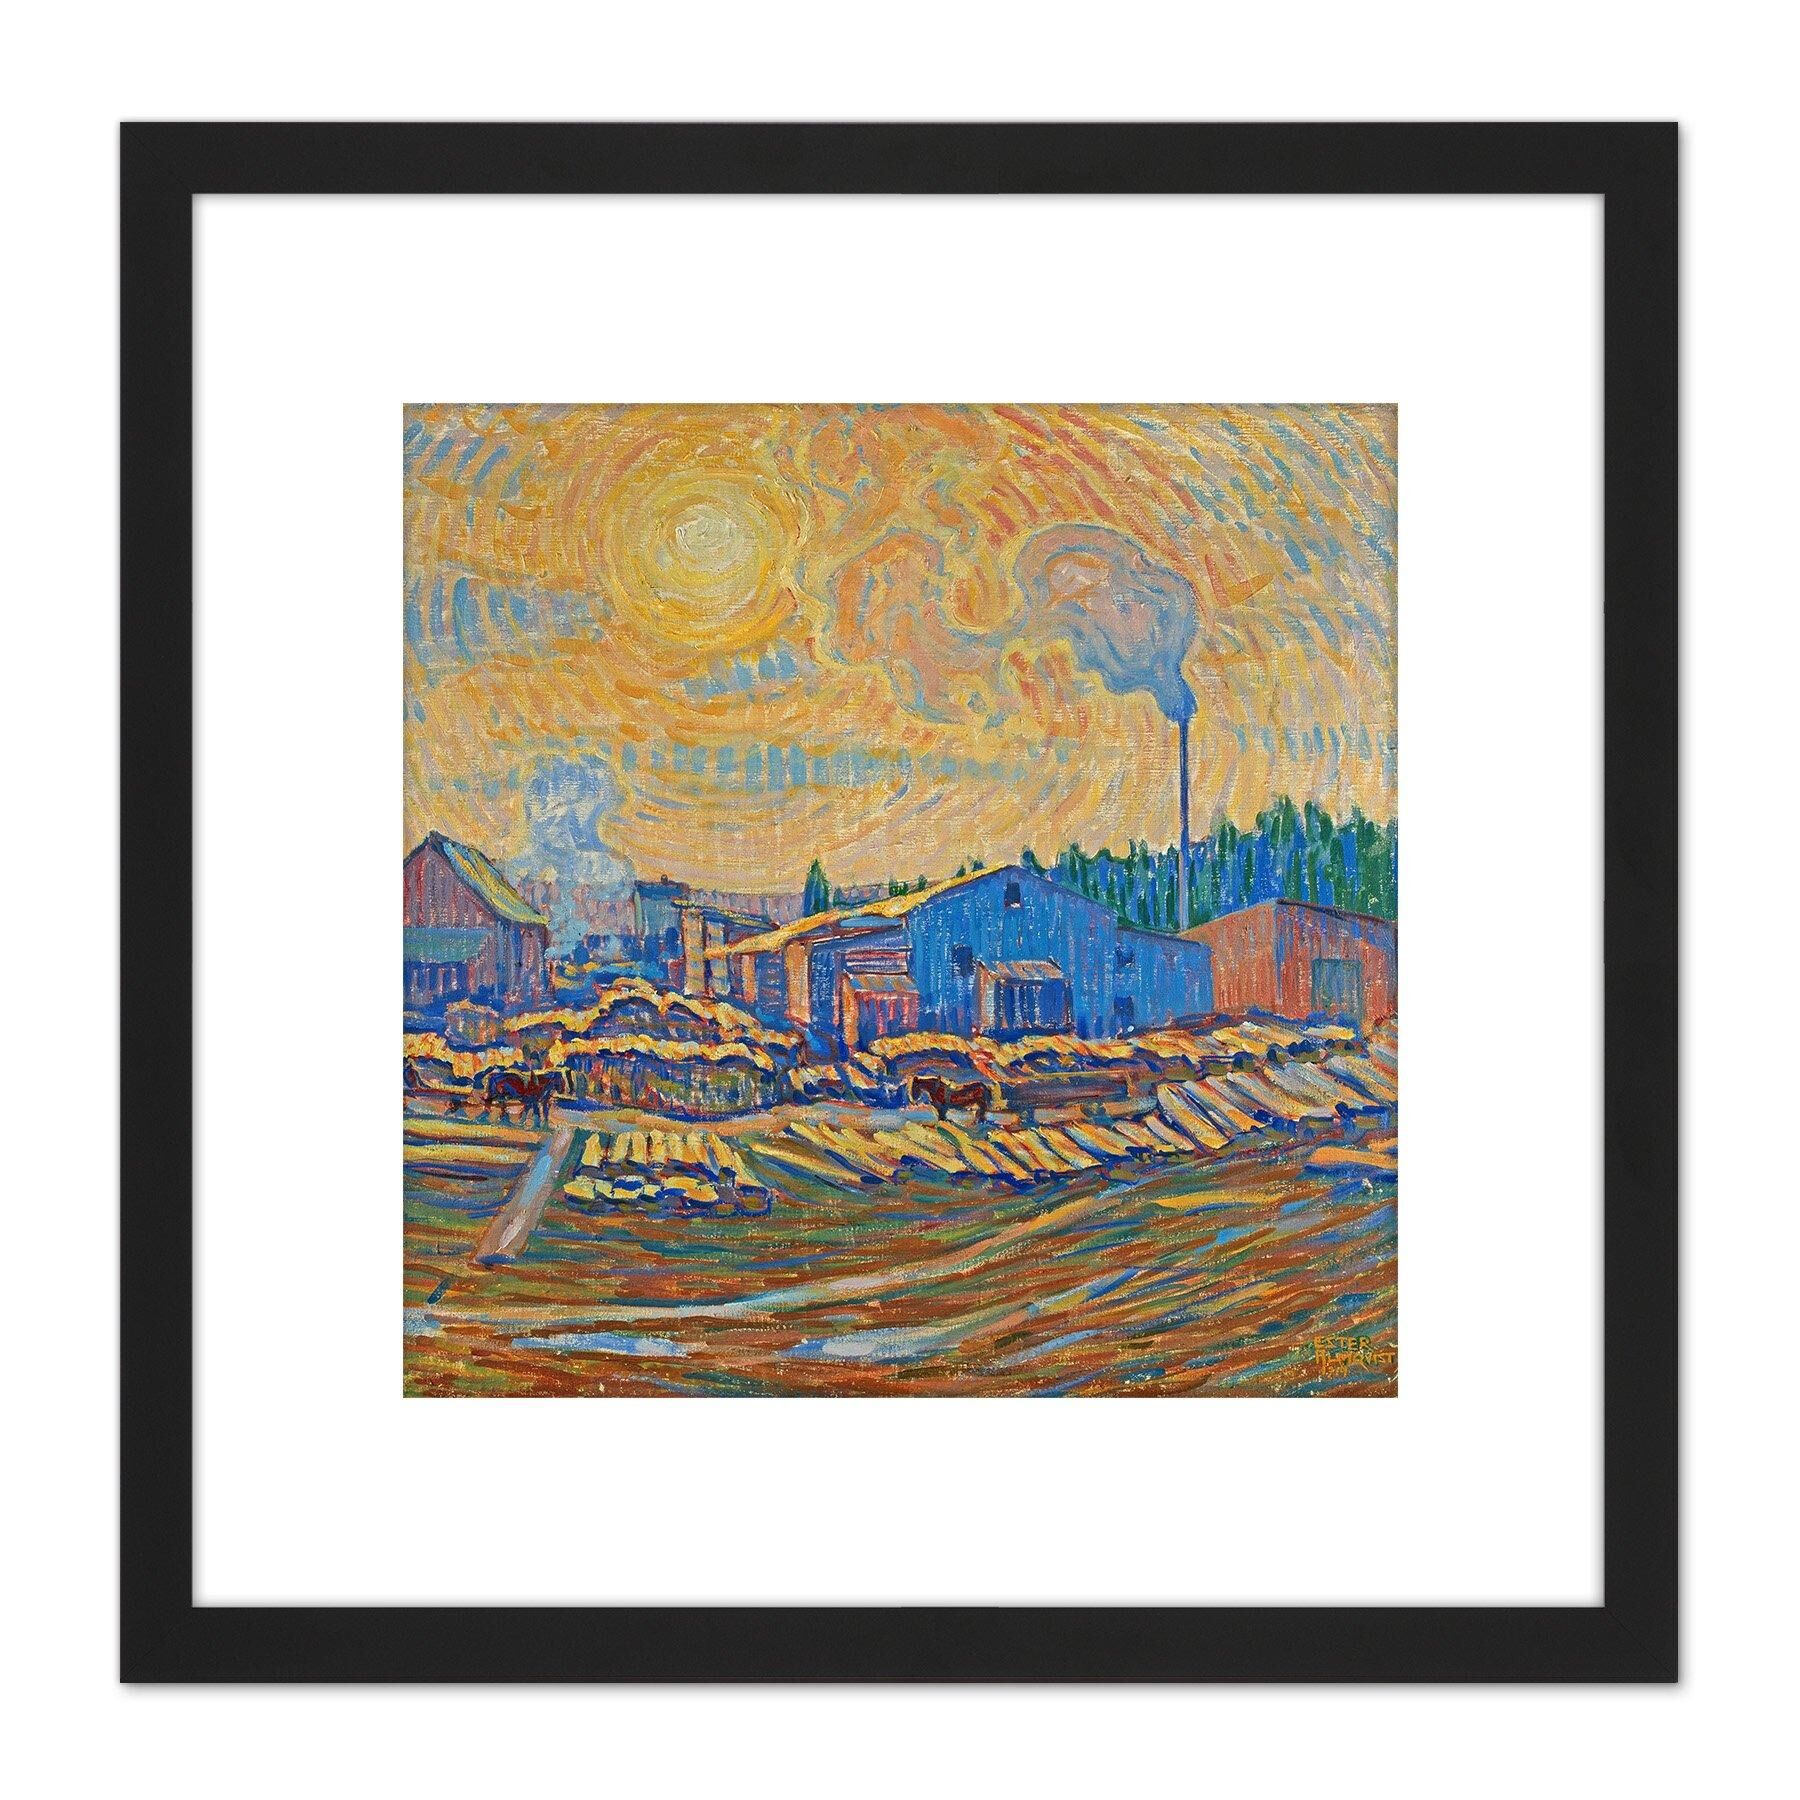 Artery8 Ester Almqvist The Sawmill December Sun 8X8 Inch Square Wooden Framed Wall Art Print Picture with Mount